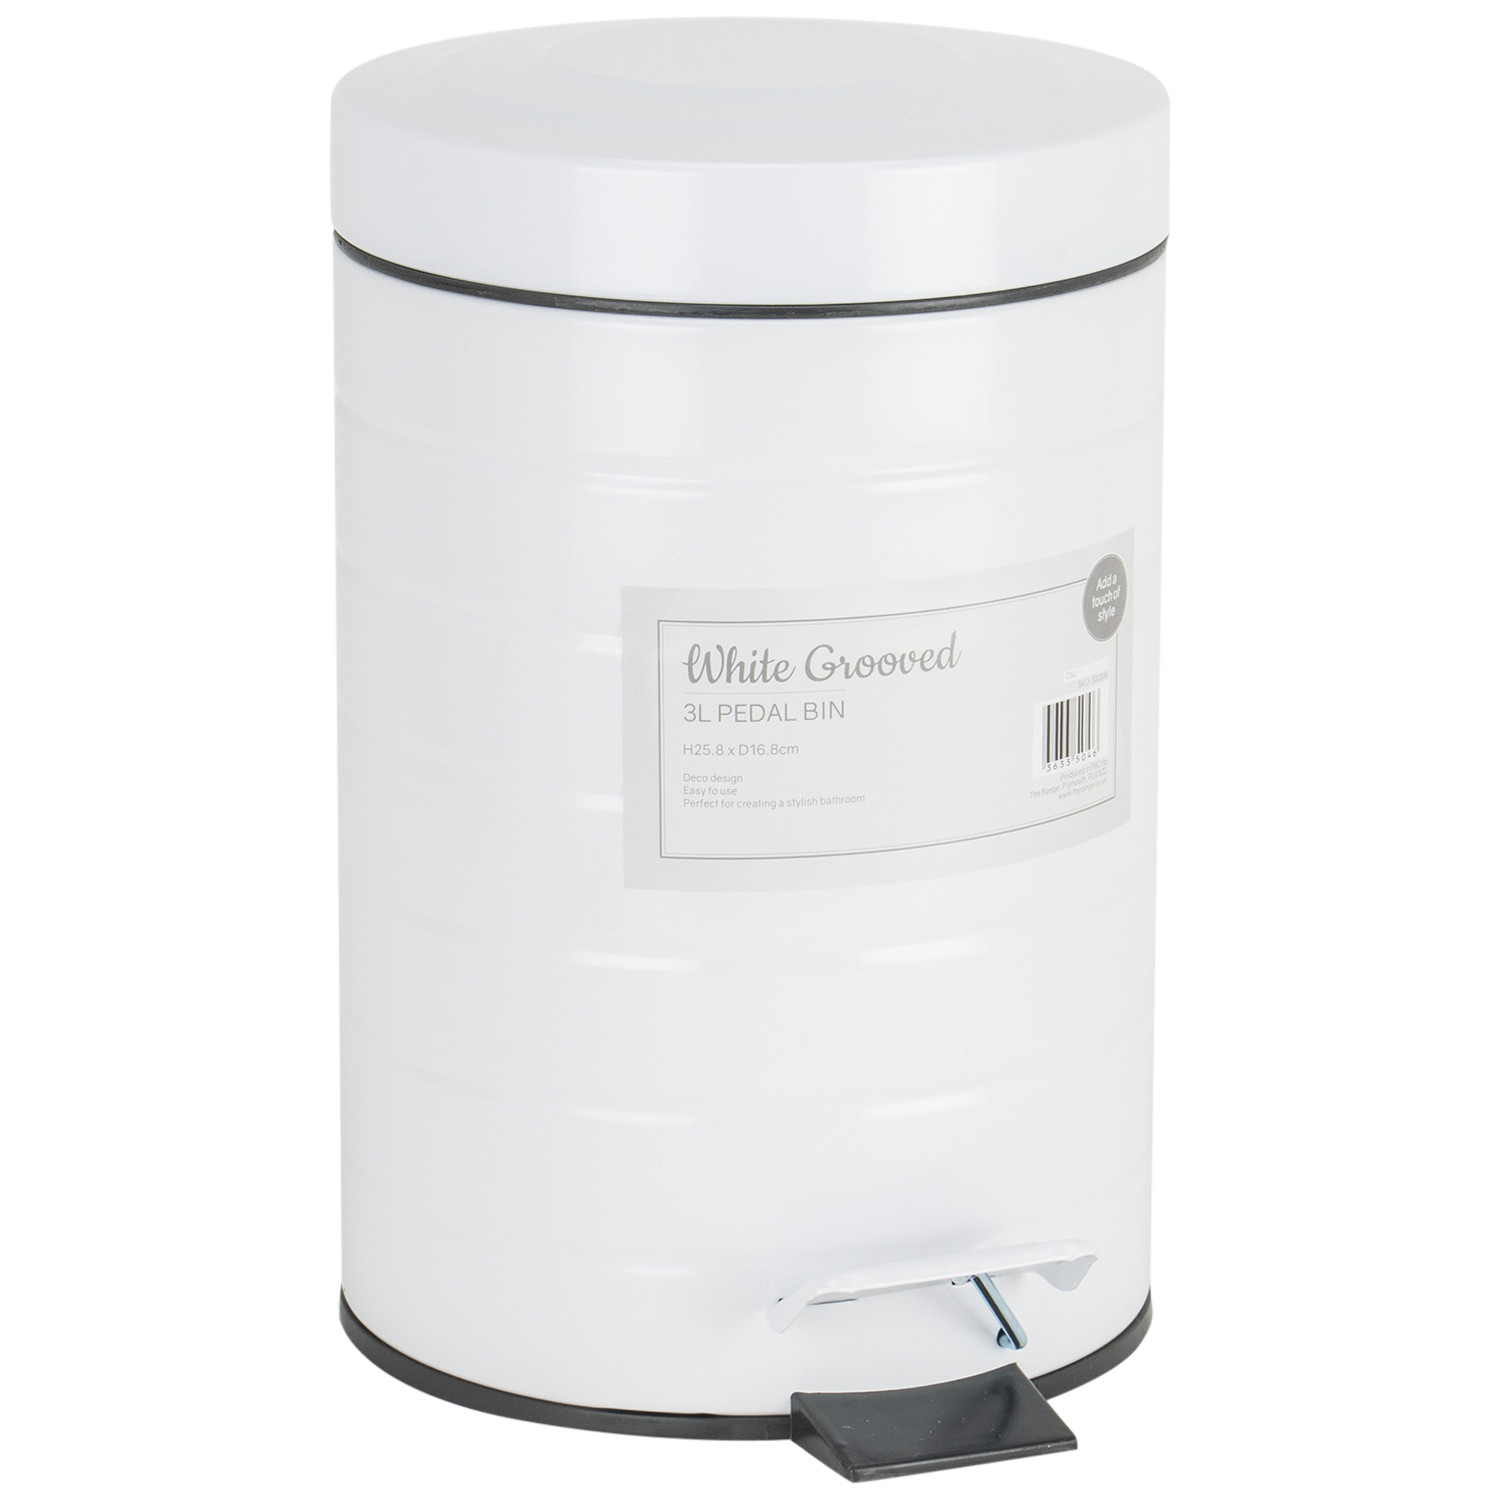 White Grooved Pedal Bin 3L Image